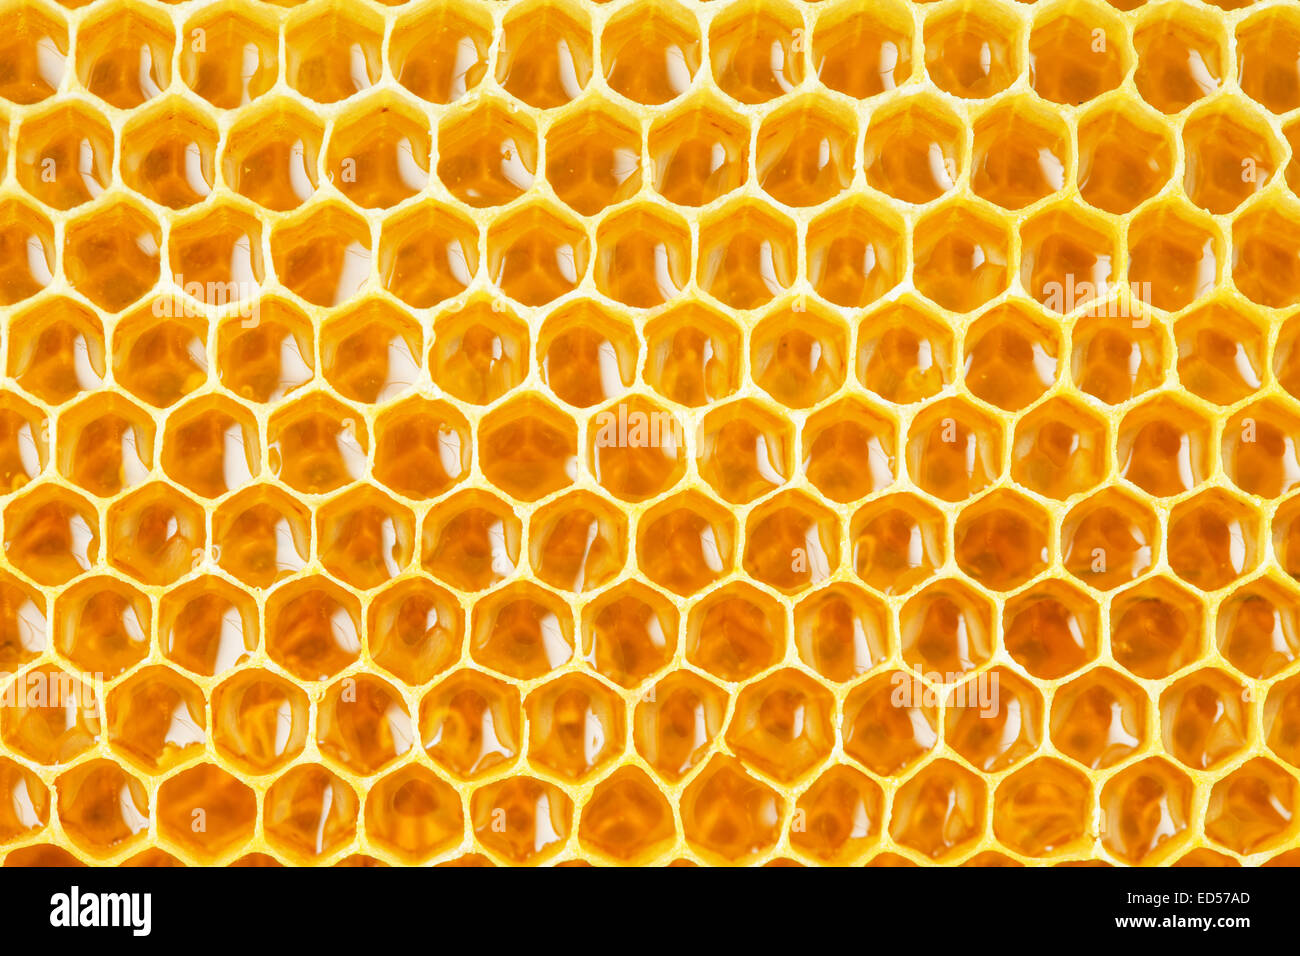 honeycomb cells natural background Stock Photo